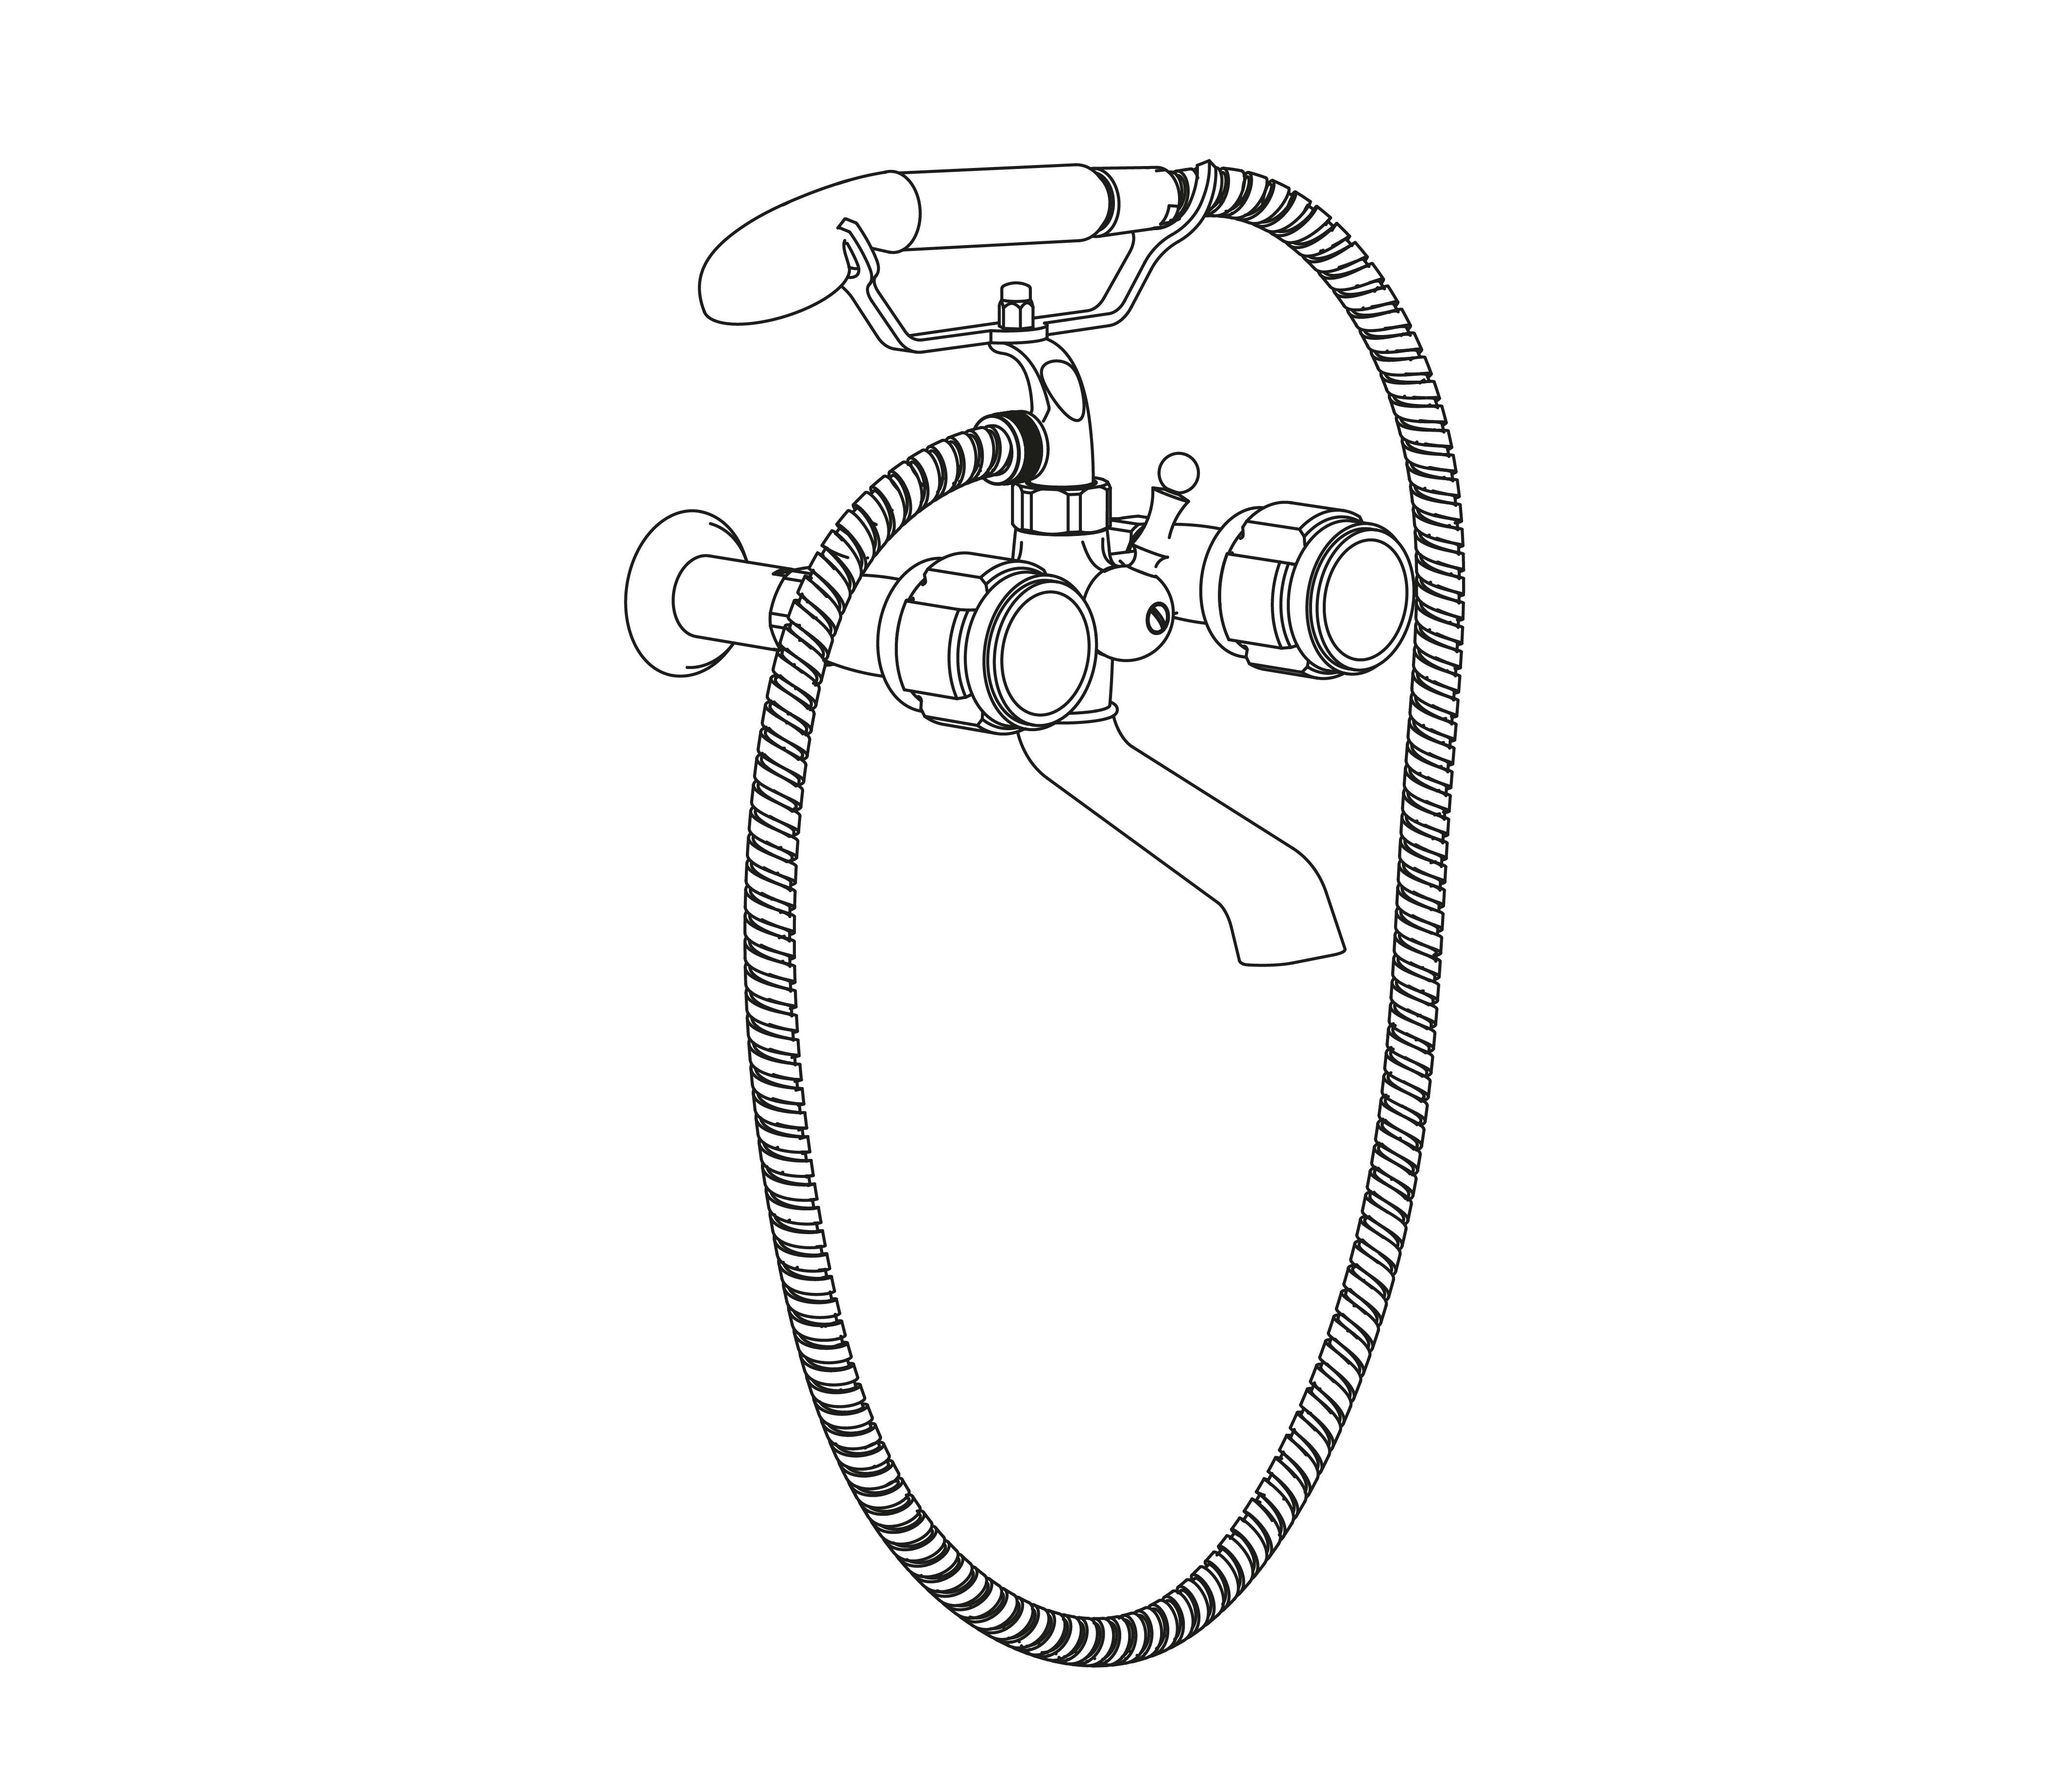 S83-3201 Wall mounted bath and shower mixer